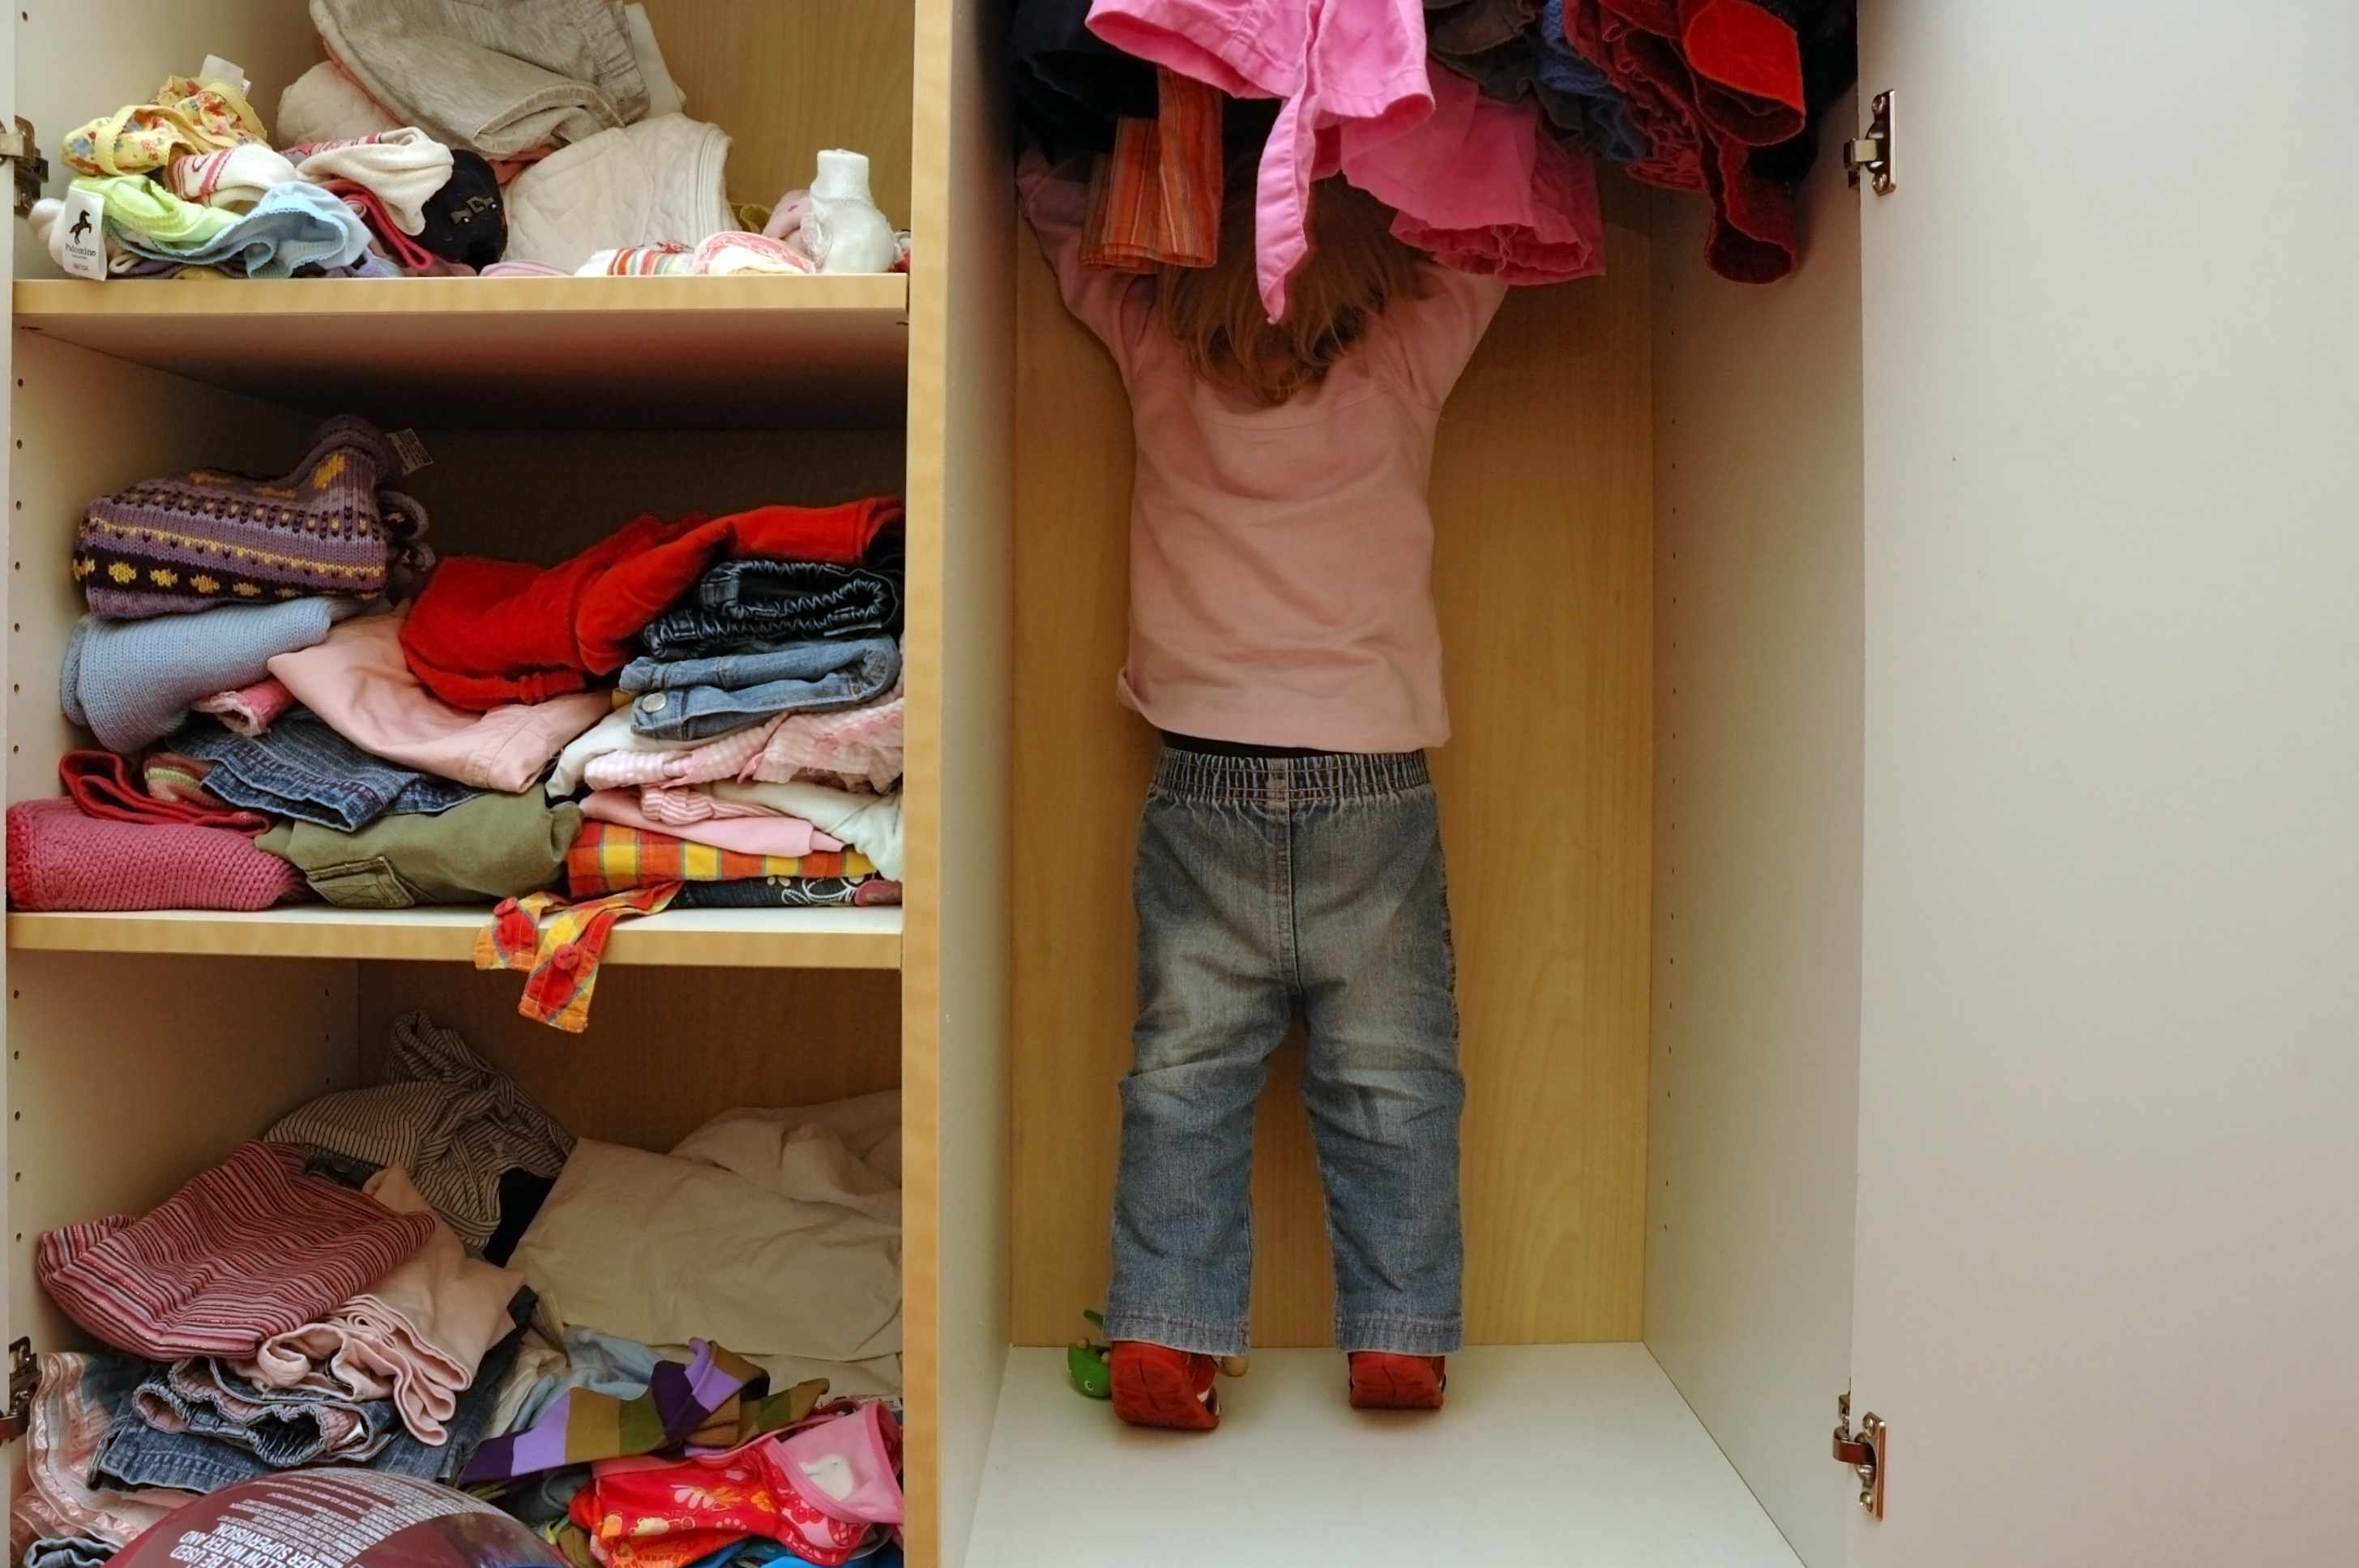 Closet with little girl in it